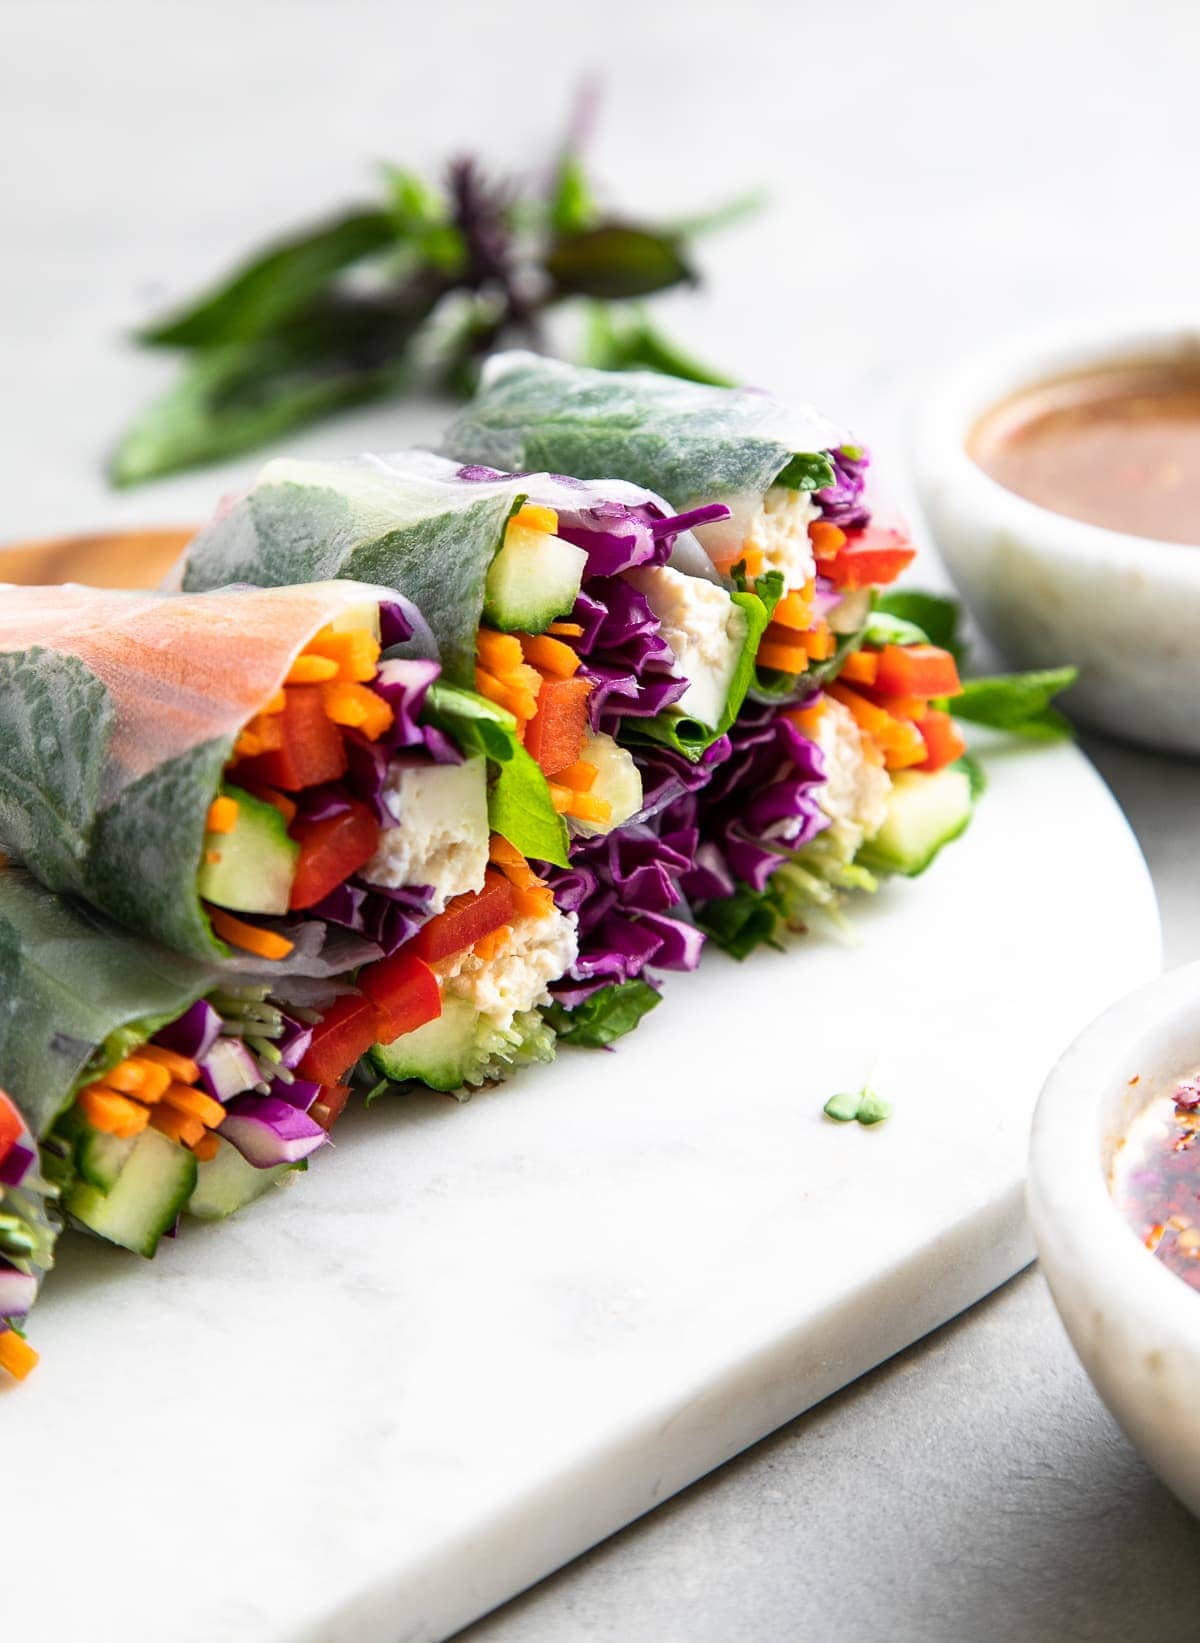 FRESH SUMMER ROLLS + TWO DIPPING SAUCES